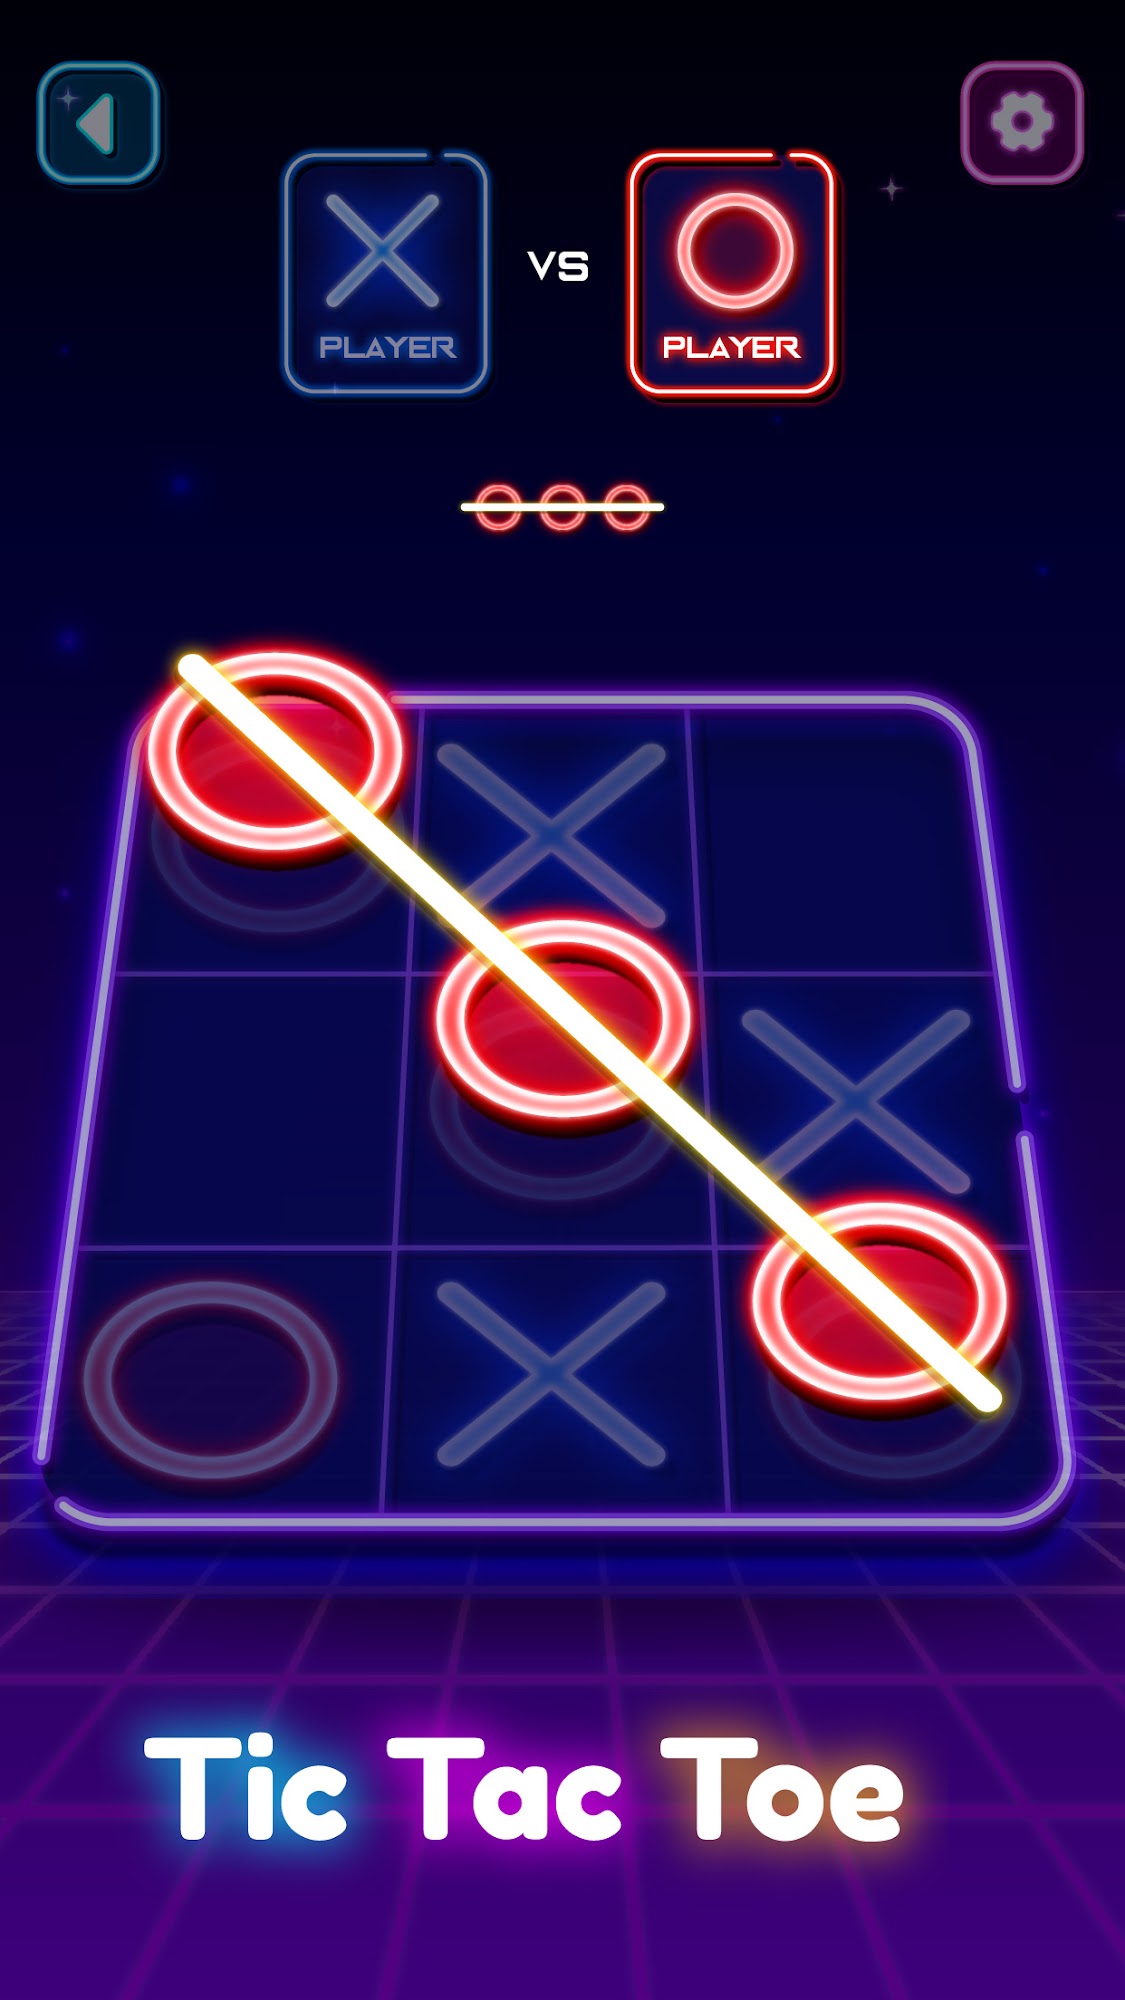 Full version of Android Logic game apk Tic Tac Toe - 2 Player XO for tablet and phone.